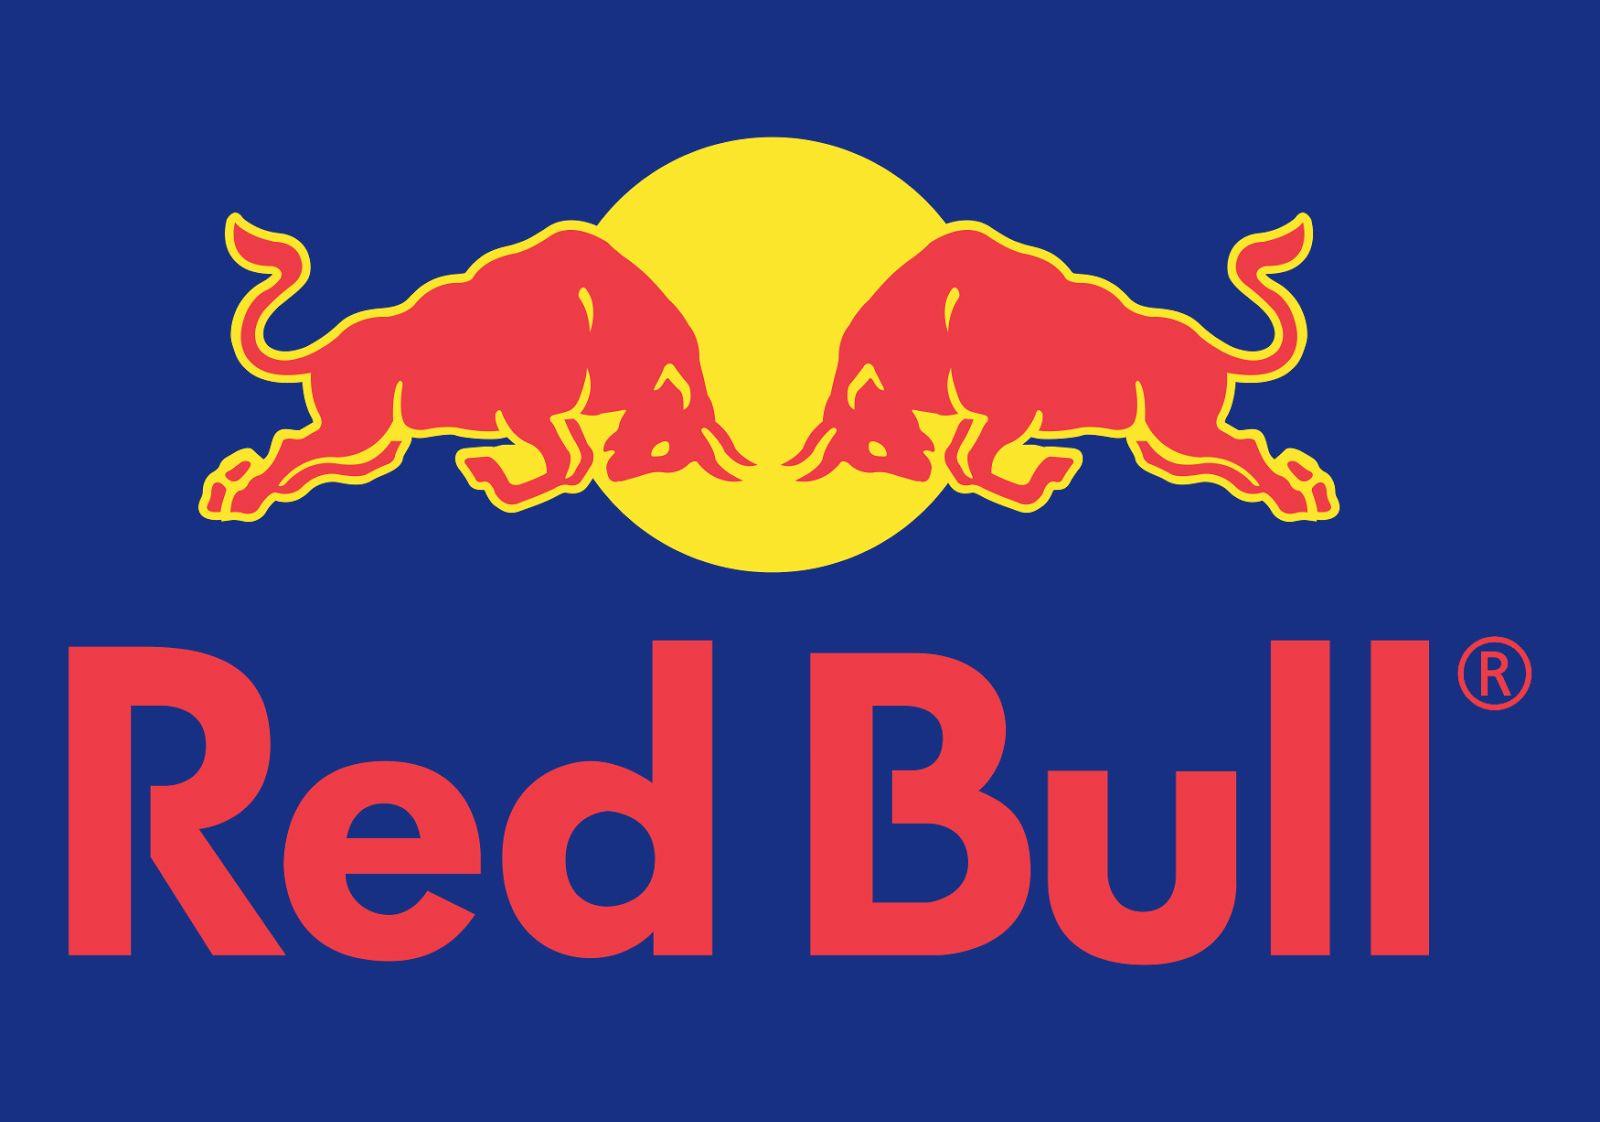 Two Red Bulls Logo - Red Bull Logo, Red Bull Symbol, Meaning, History and Evolution